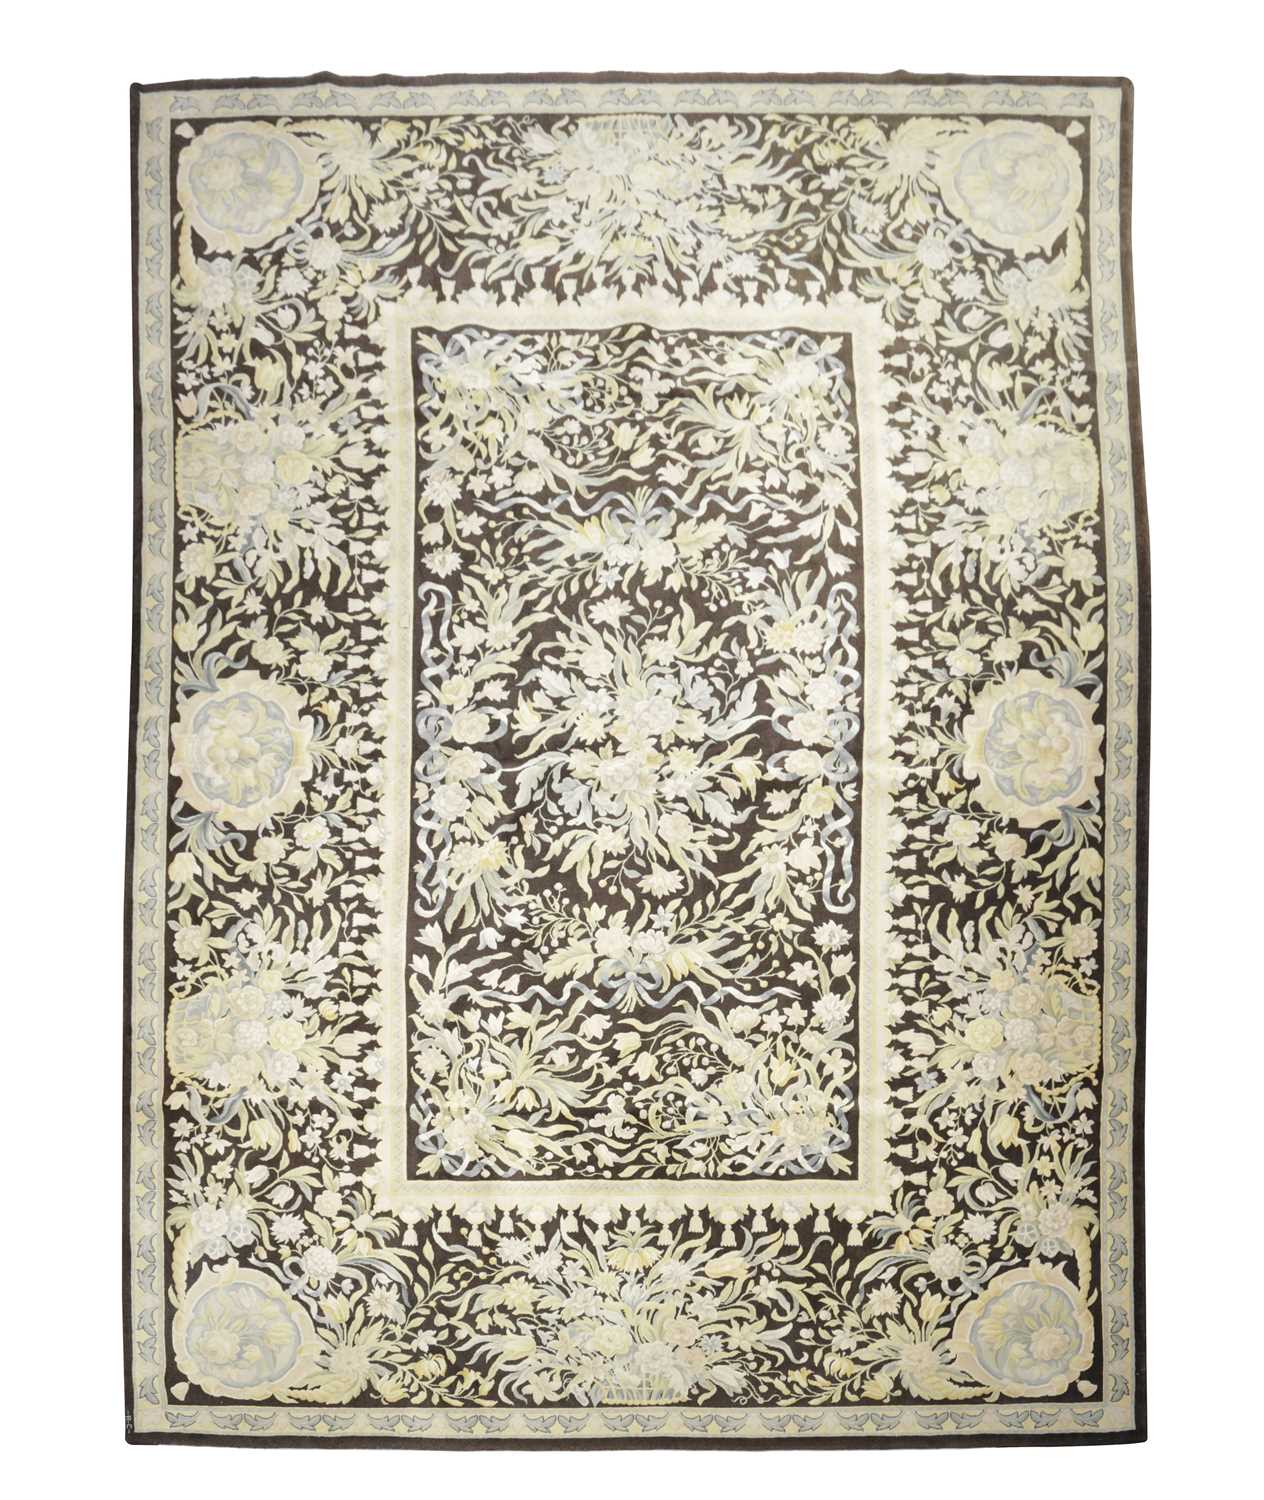 A LARGE CARPET OF 18TH CENTURY EUROPEAN DESIGN, 20TH CENTURY, the pale charcoal field centered by